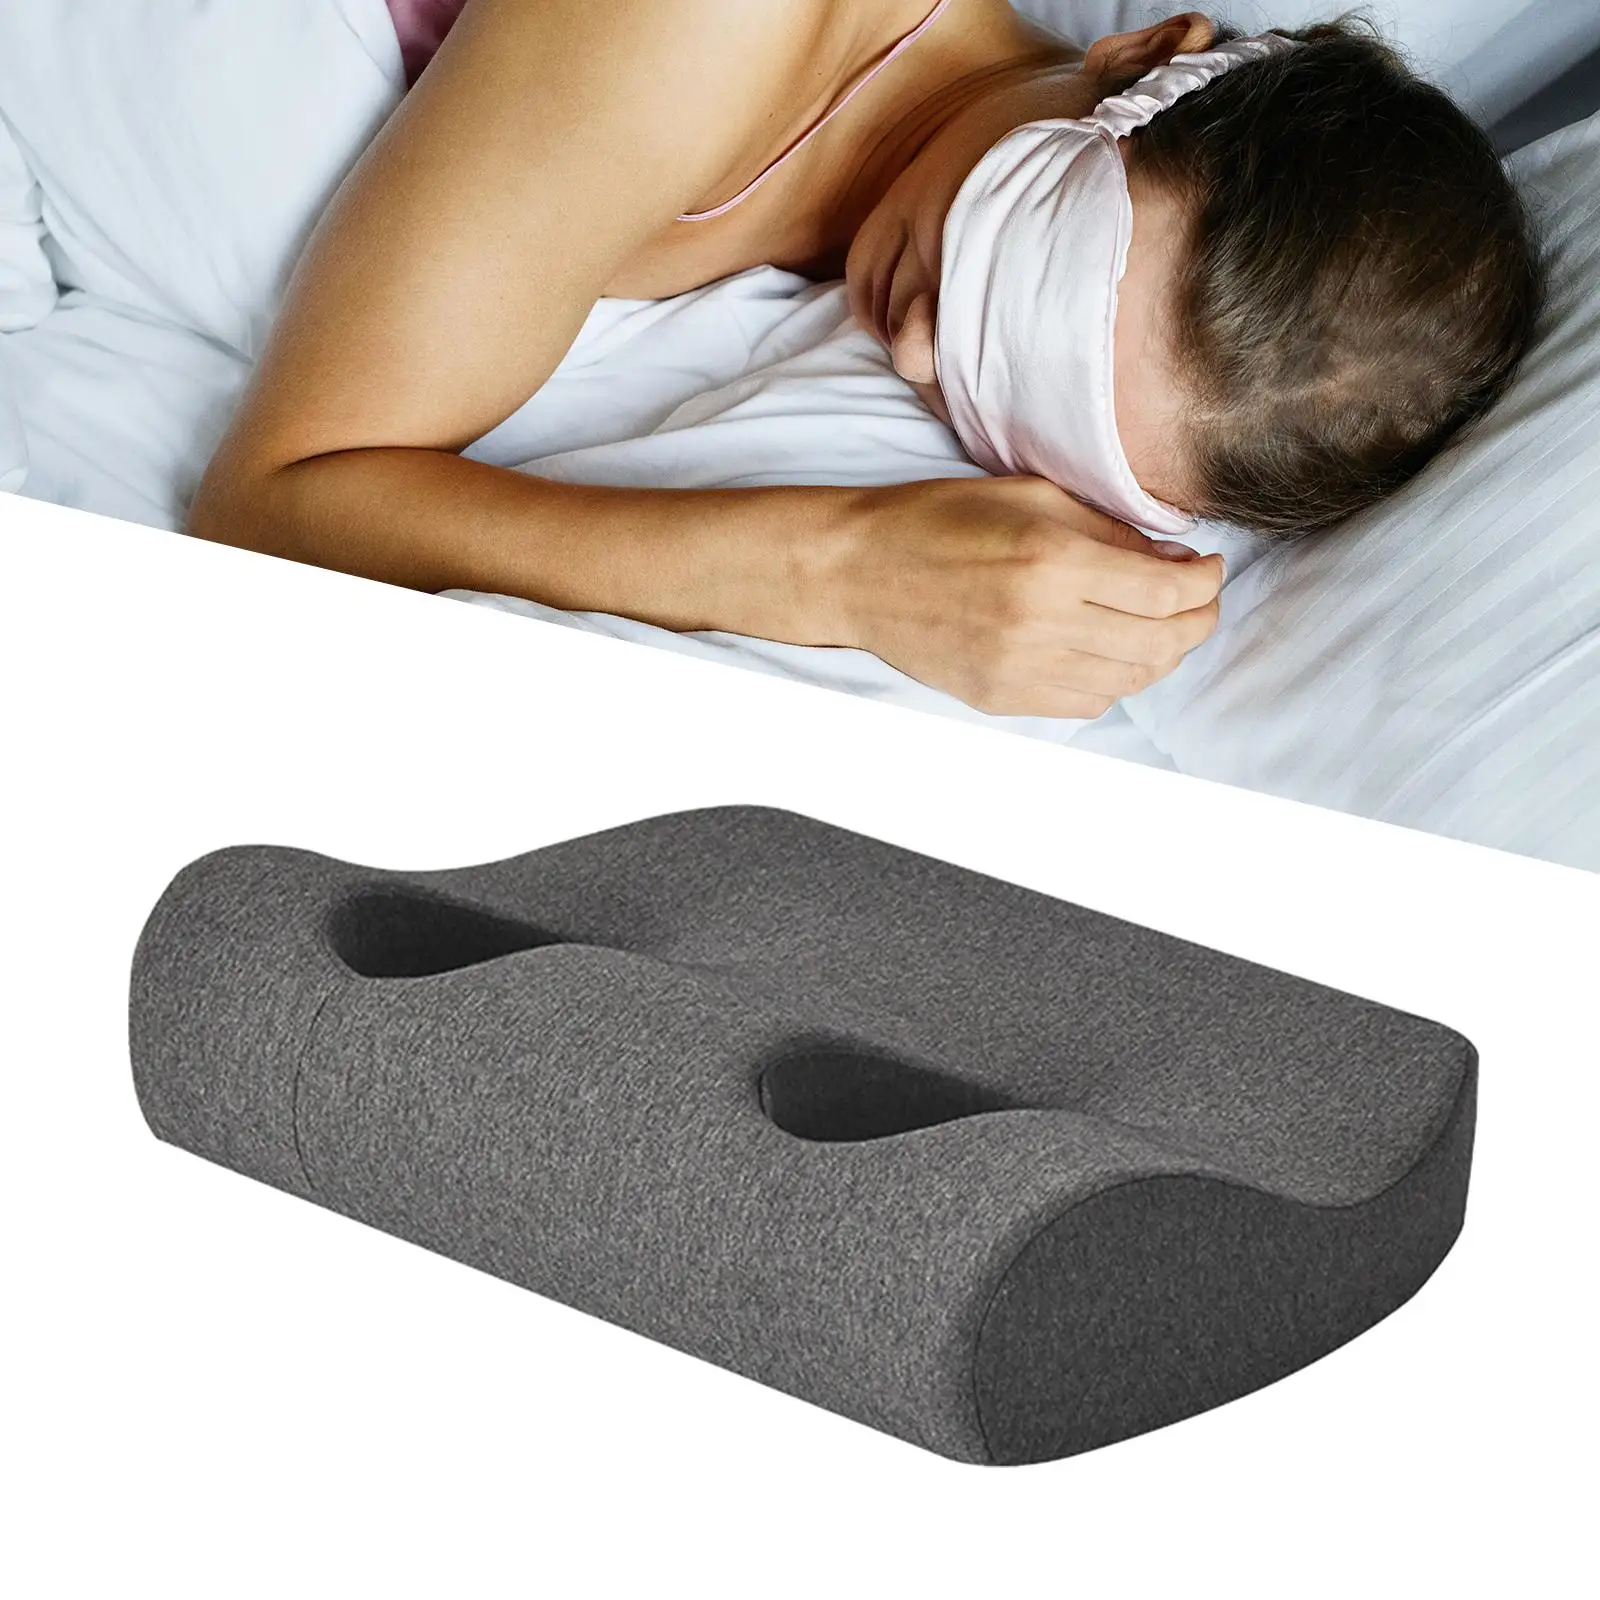 Ear Pillows with Hole Sleeping Pillow for Earplugs Earbuds Stomach Sleeping